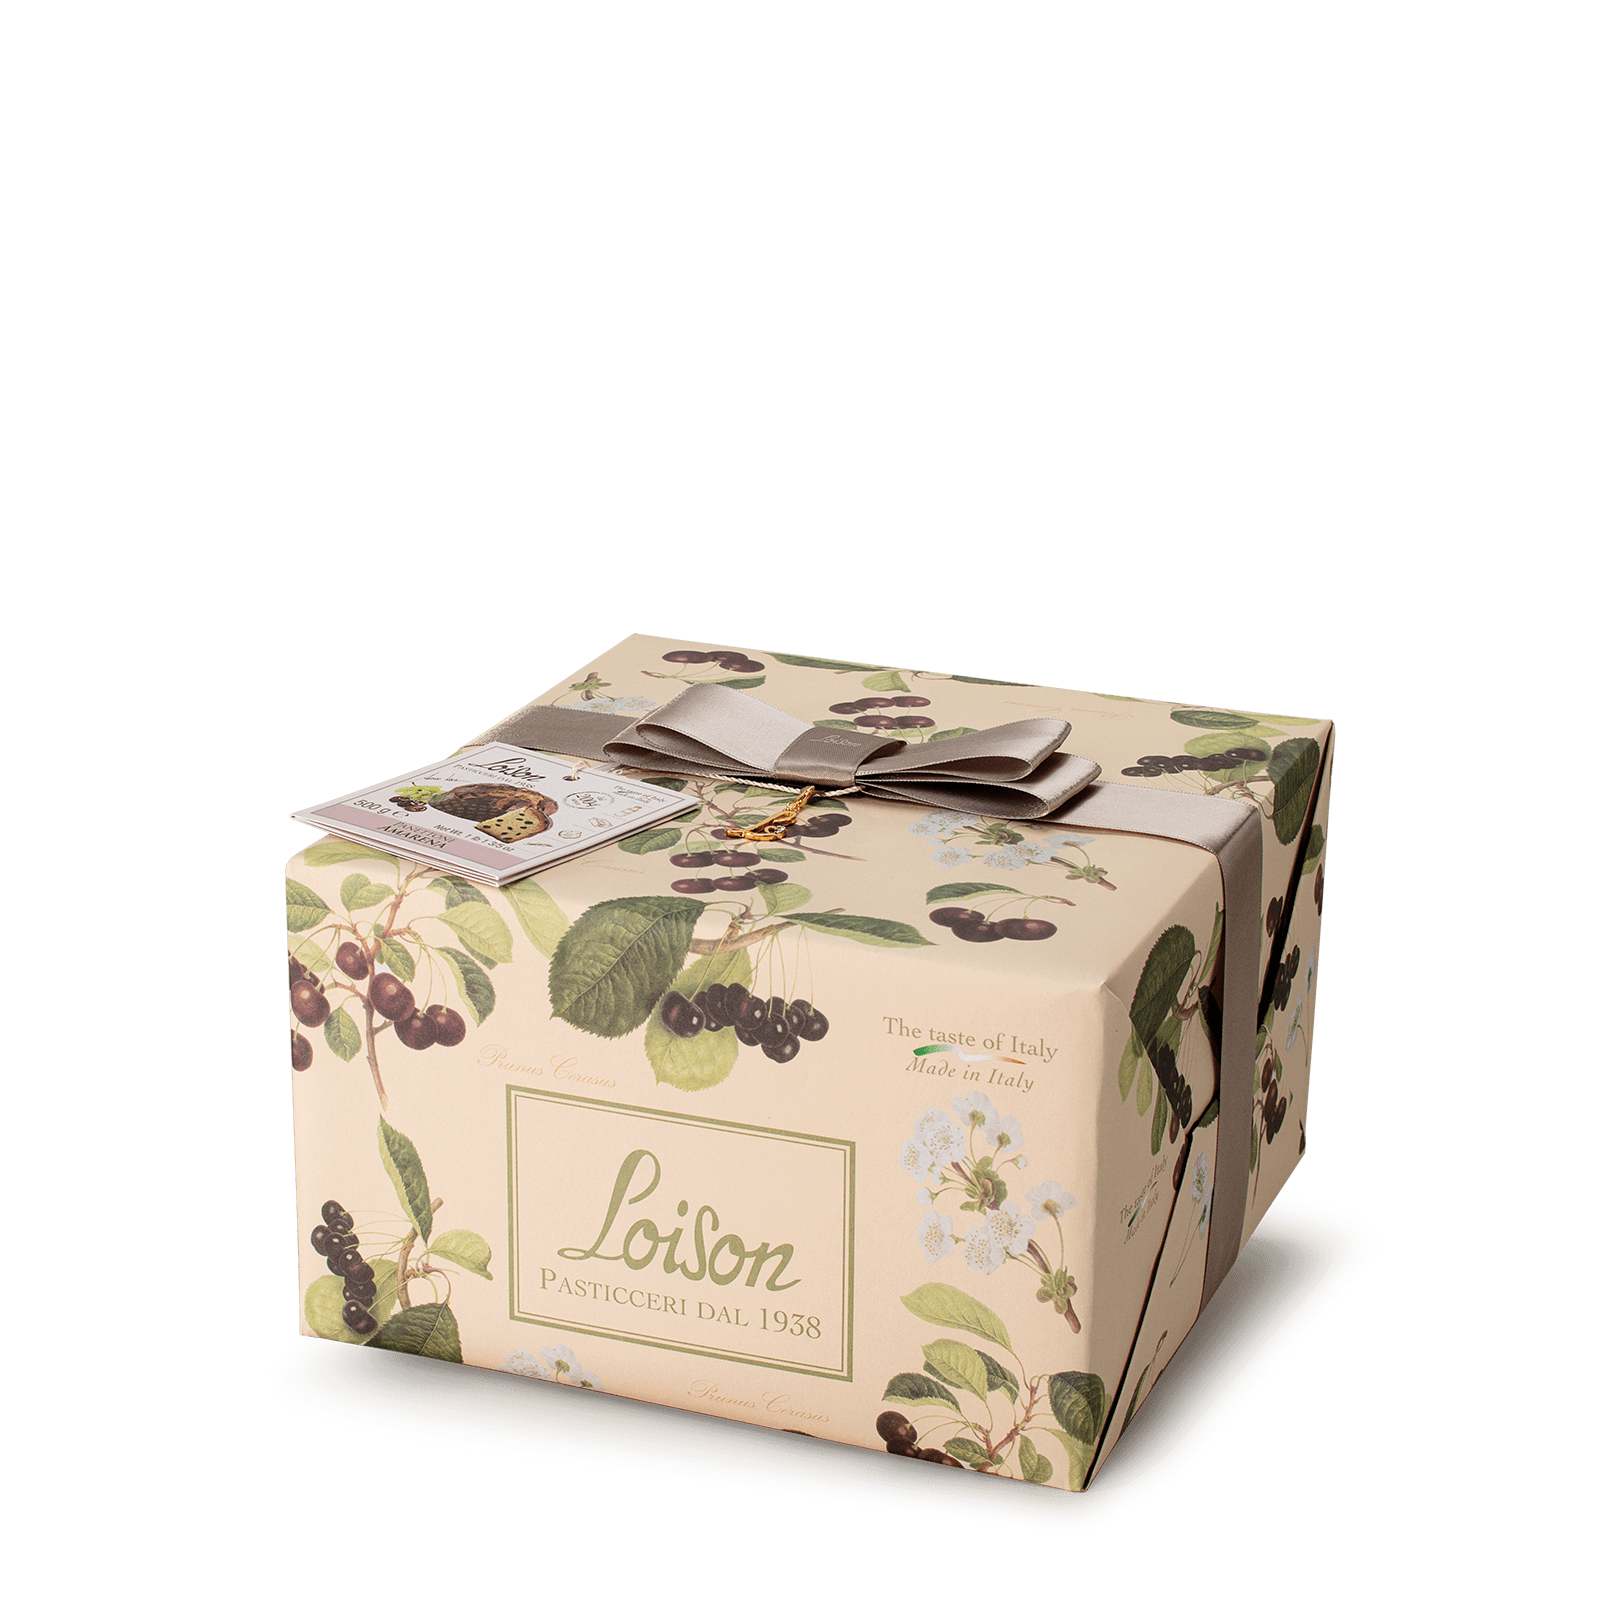 Cherries Panettone - Fruit and Flowers Loison